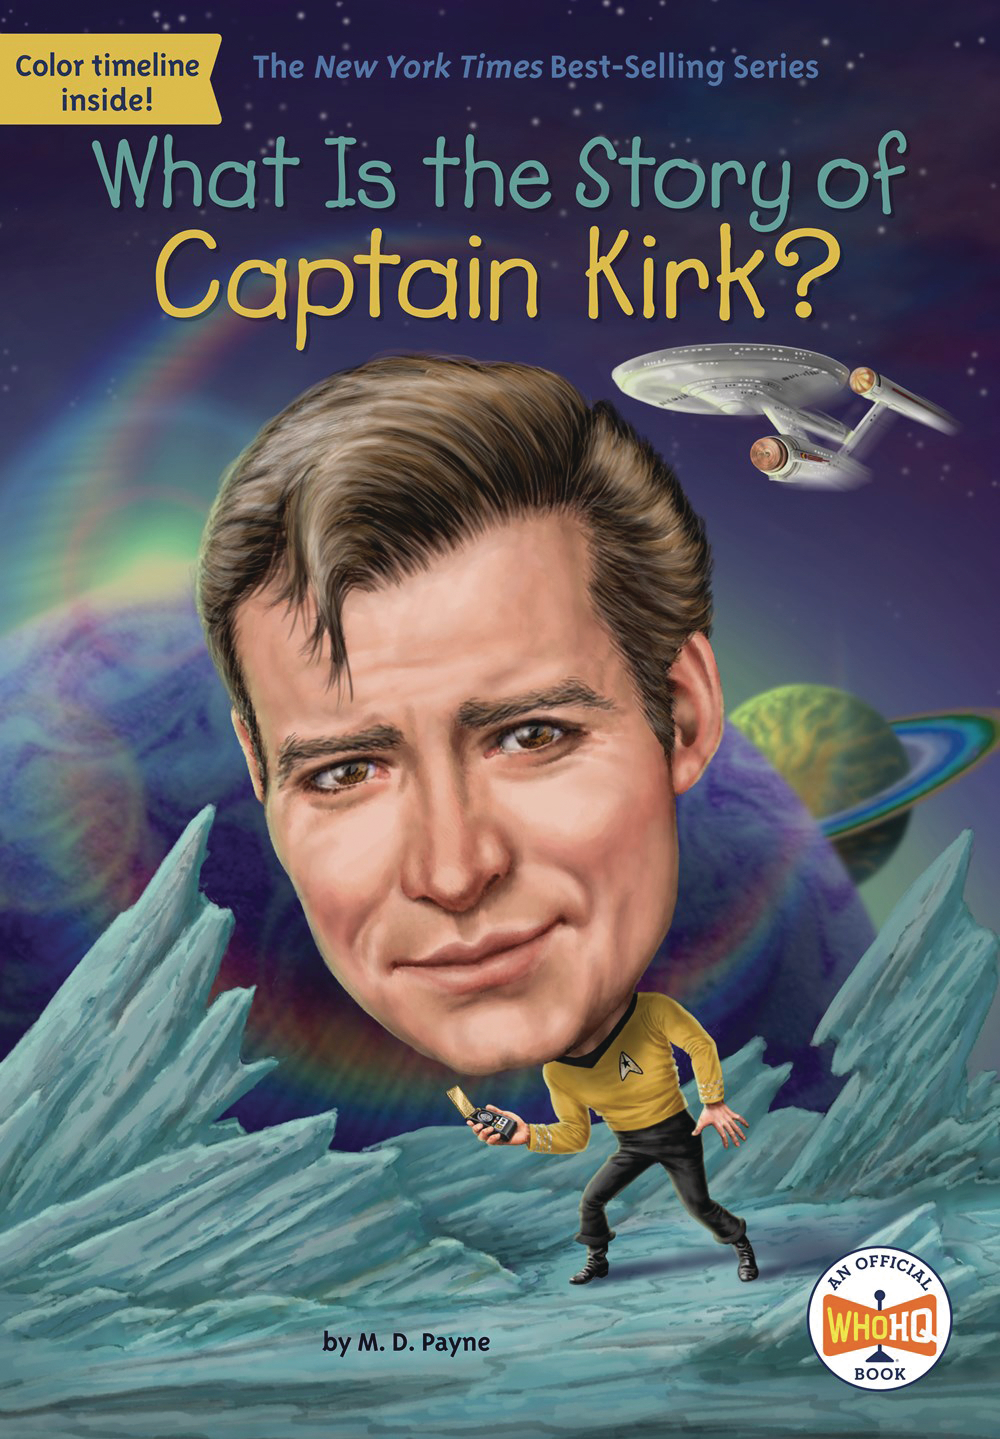 What Is The Story of Soft Cover Volume 5 Captain Kirk